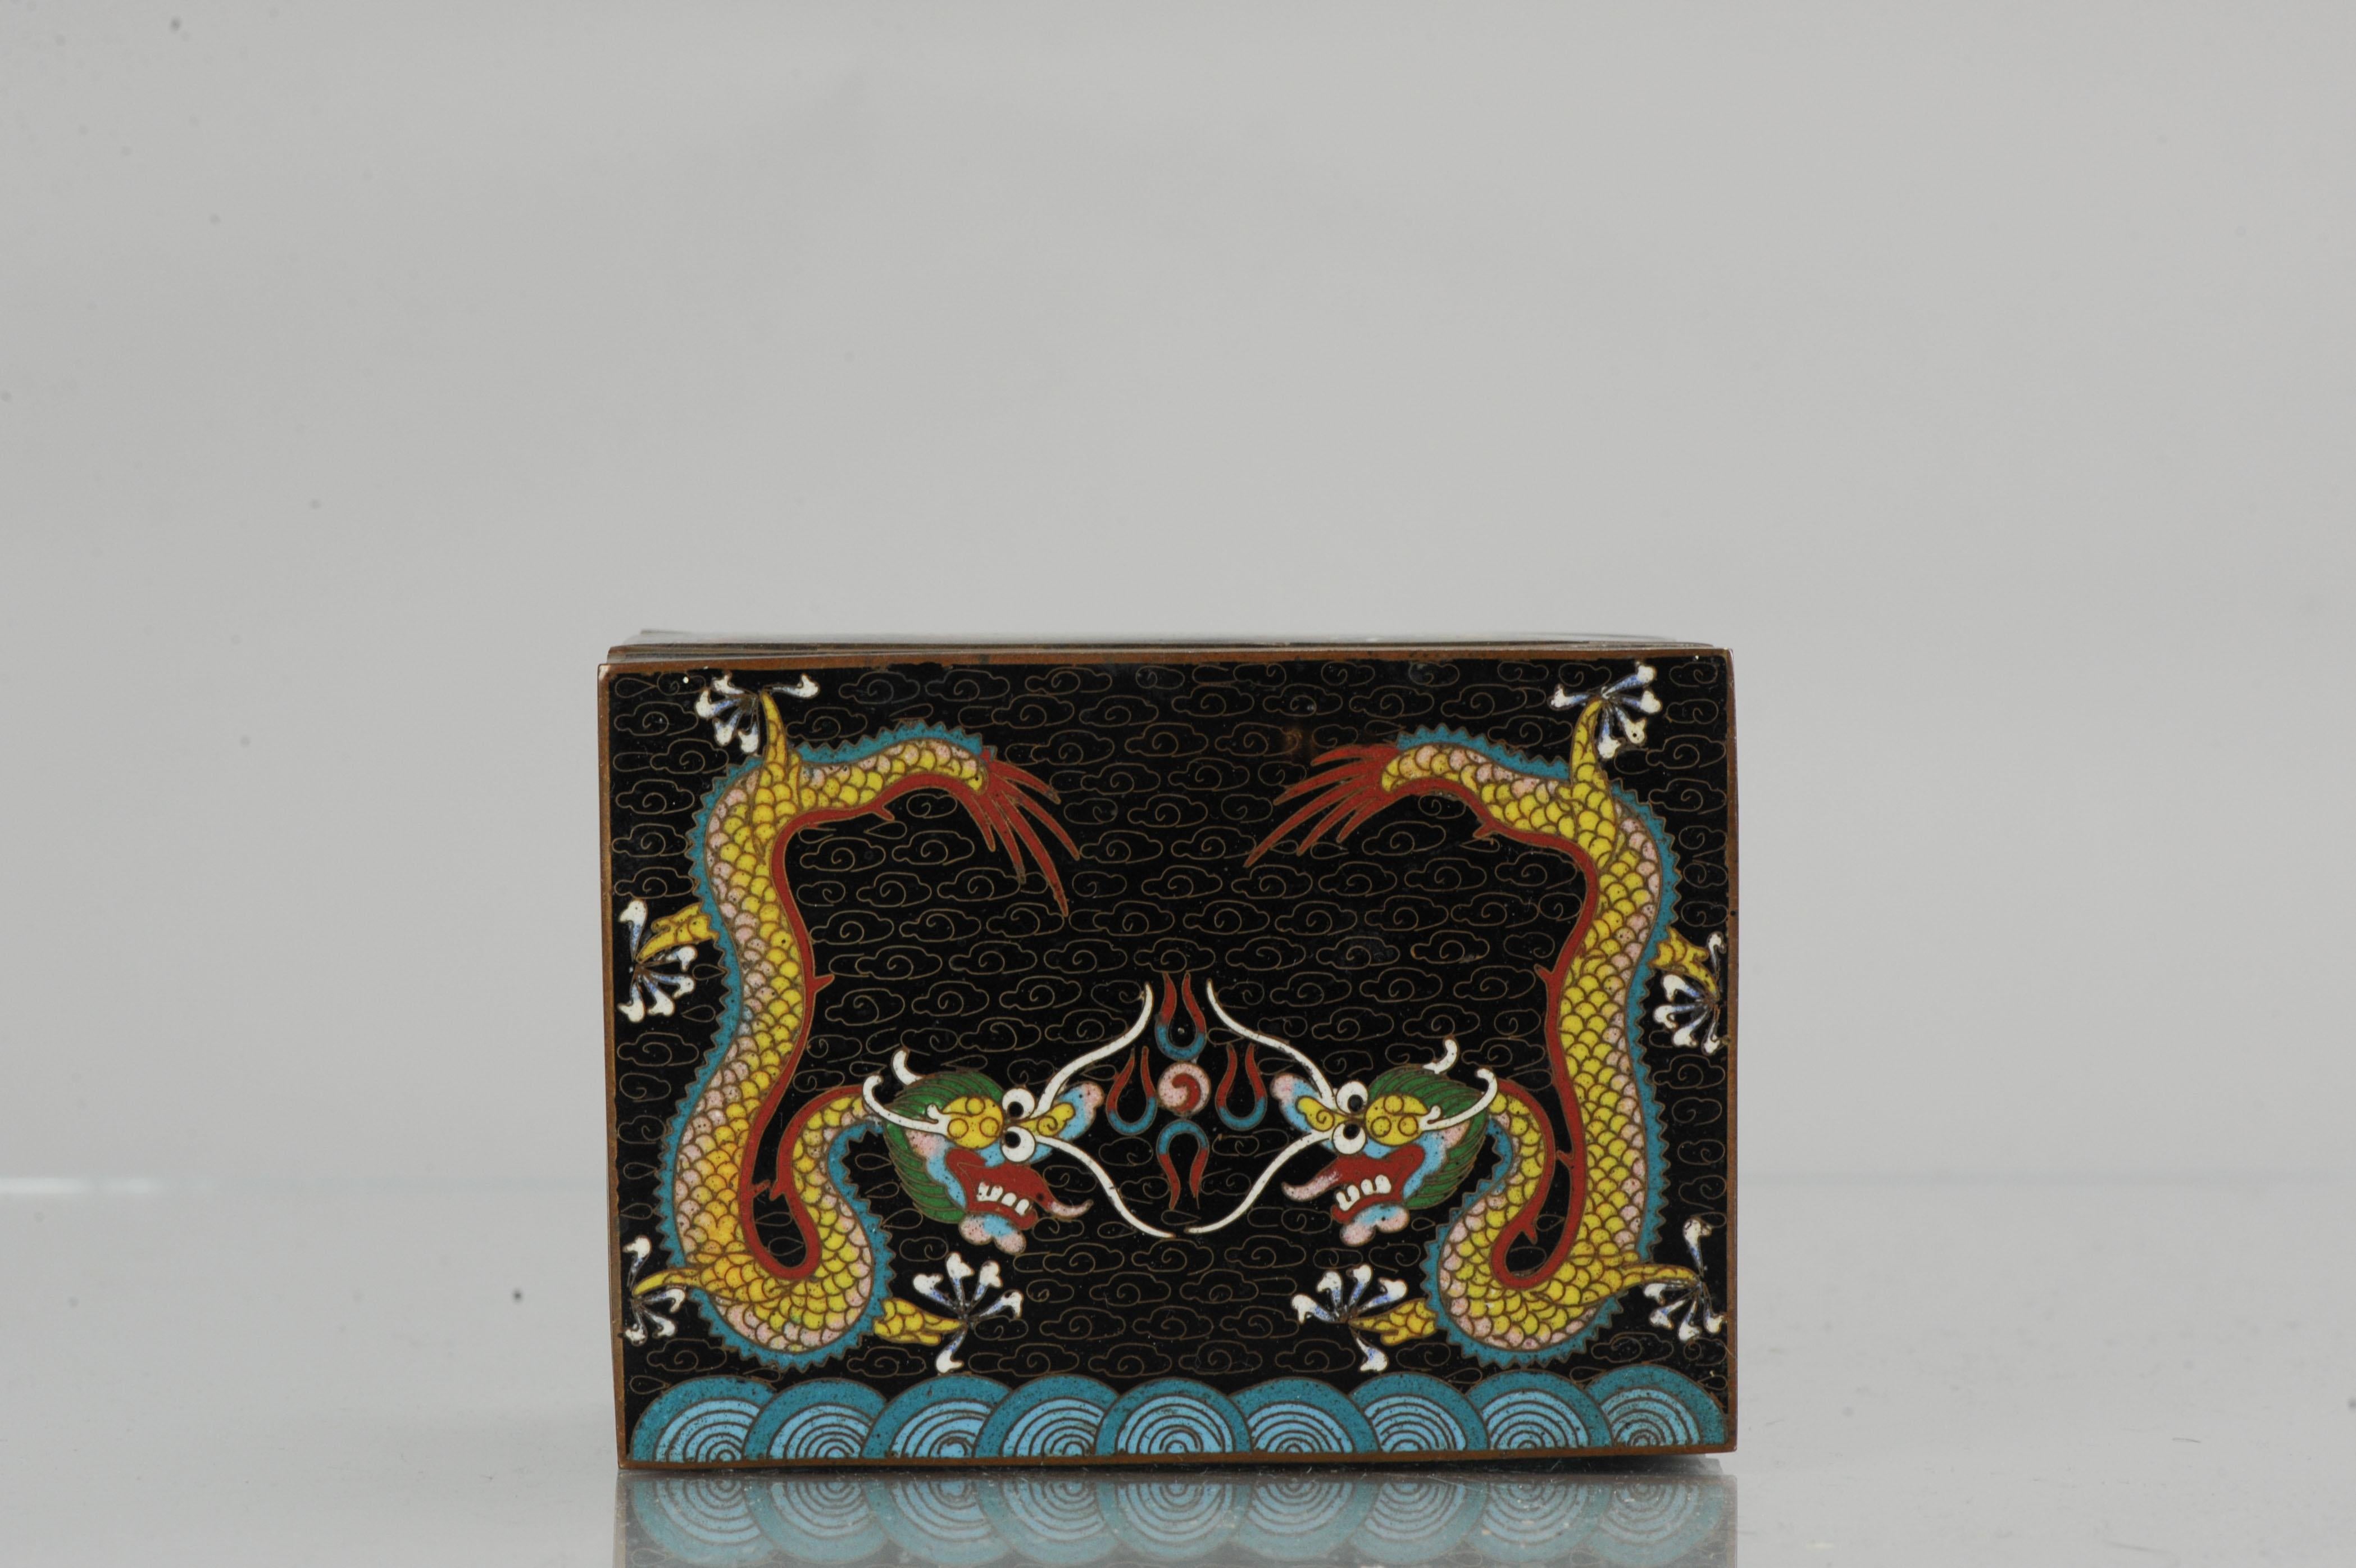 Nice Quality with superb decoration.

Additional information:
Material: Bronze / Copper 
Region of Origin: Japan
Period: 19th century Meiji Periode (1867-1912)
Condition: Some small age signs like scratches and missing enamel.
Dimension: 12 W x 7 D